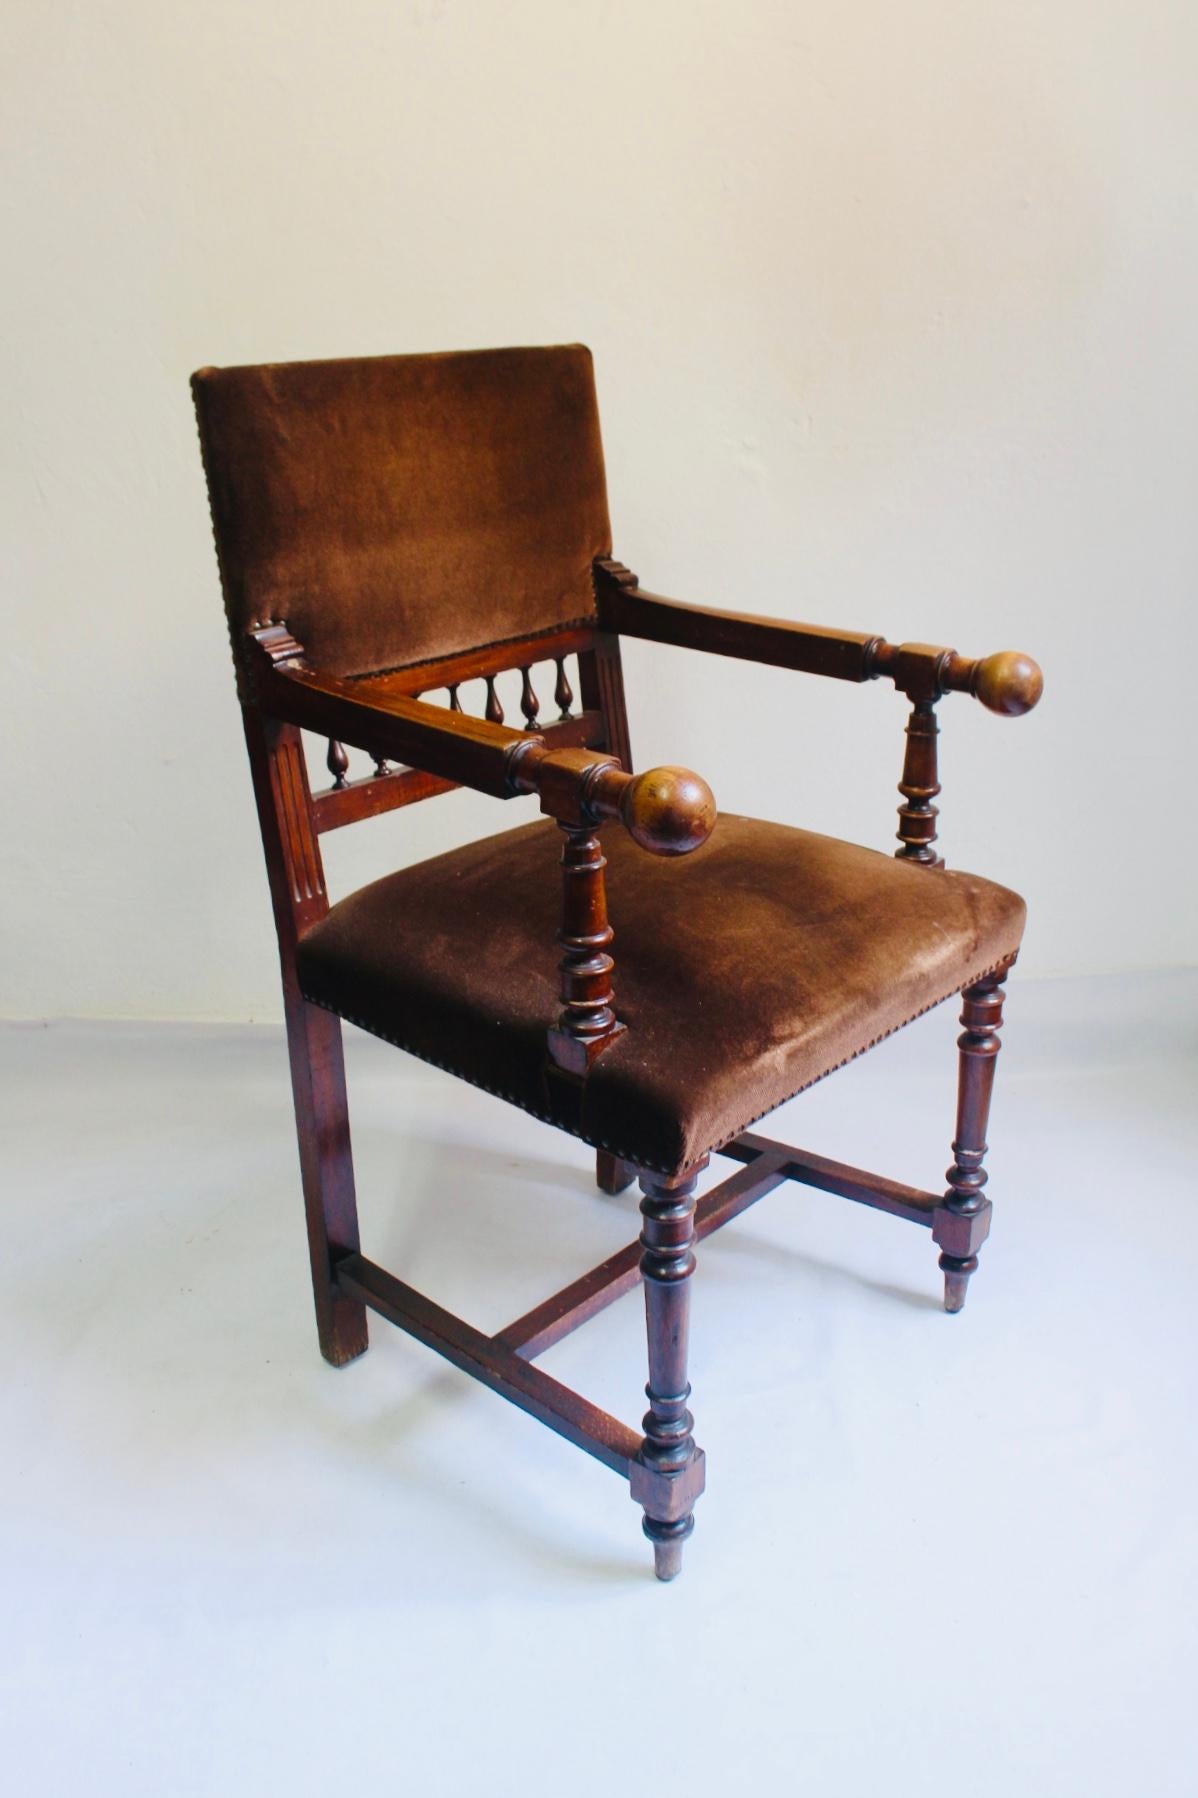 Antique 19th century Napoleon III solid wood throne chair, France.
The piece remains in very good condition and has been restored by previous owner.